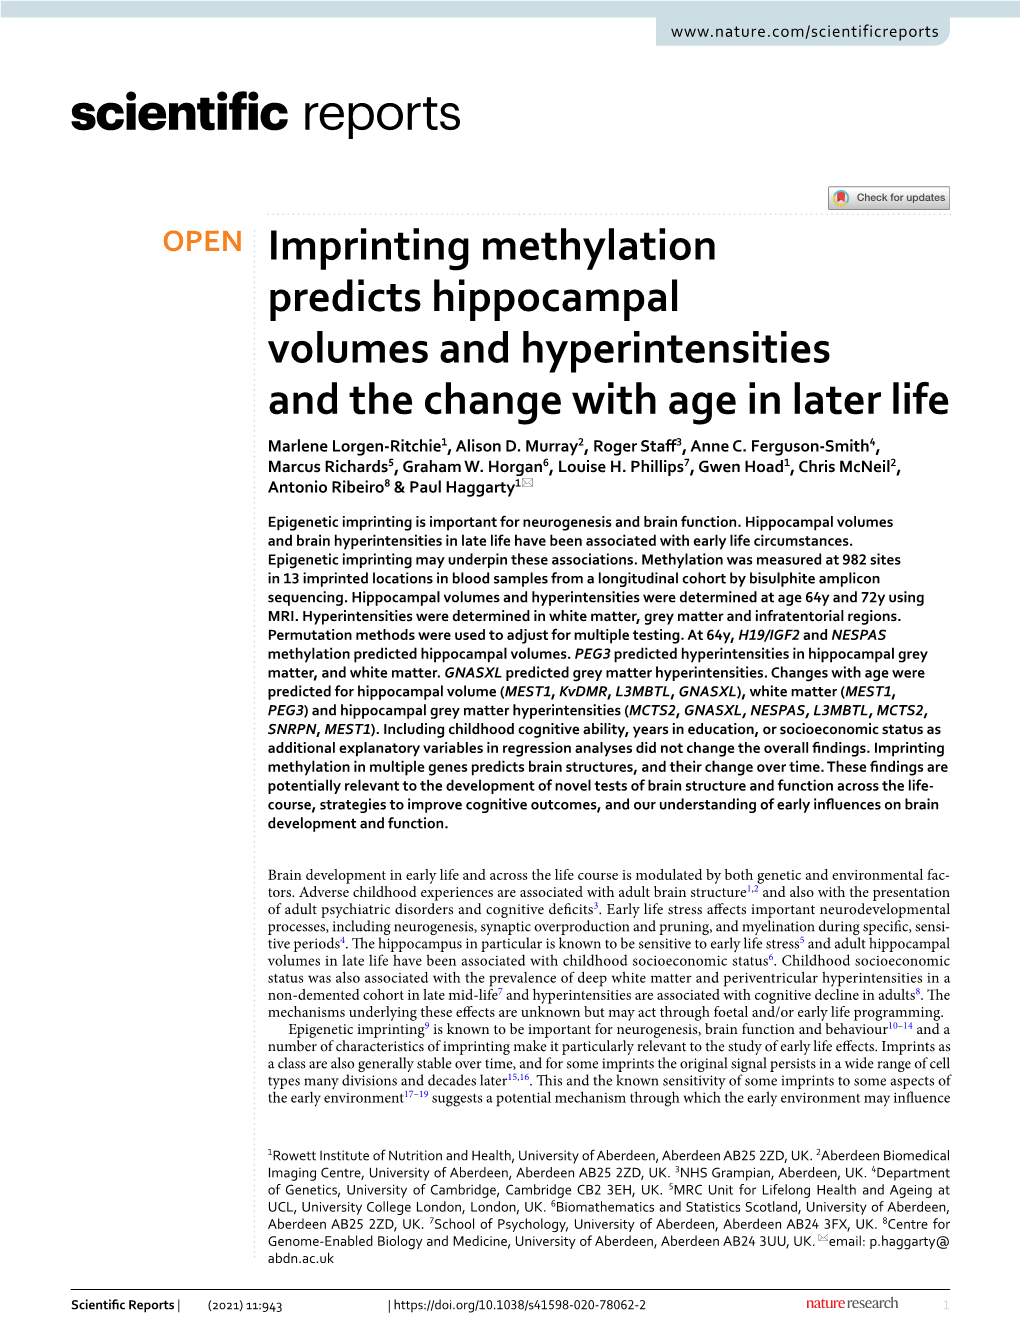 Imprinting Methylation Predicts Hippocampal Volumes and Hyperintensities and the Change with Age in Later Life Marlene Lorgen‑Ritchie1, Alison D